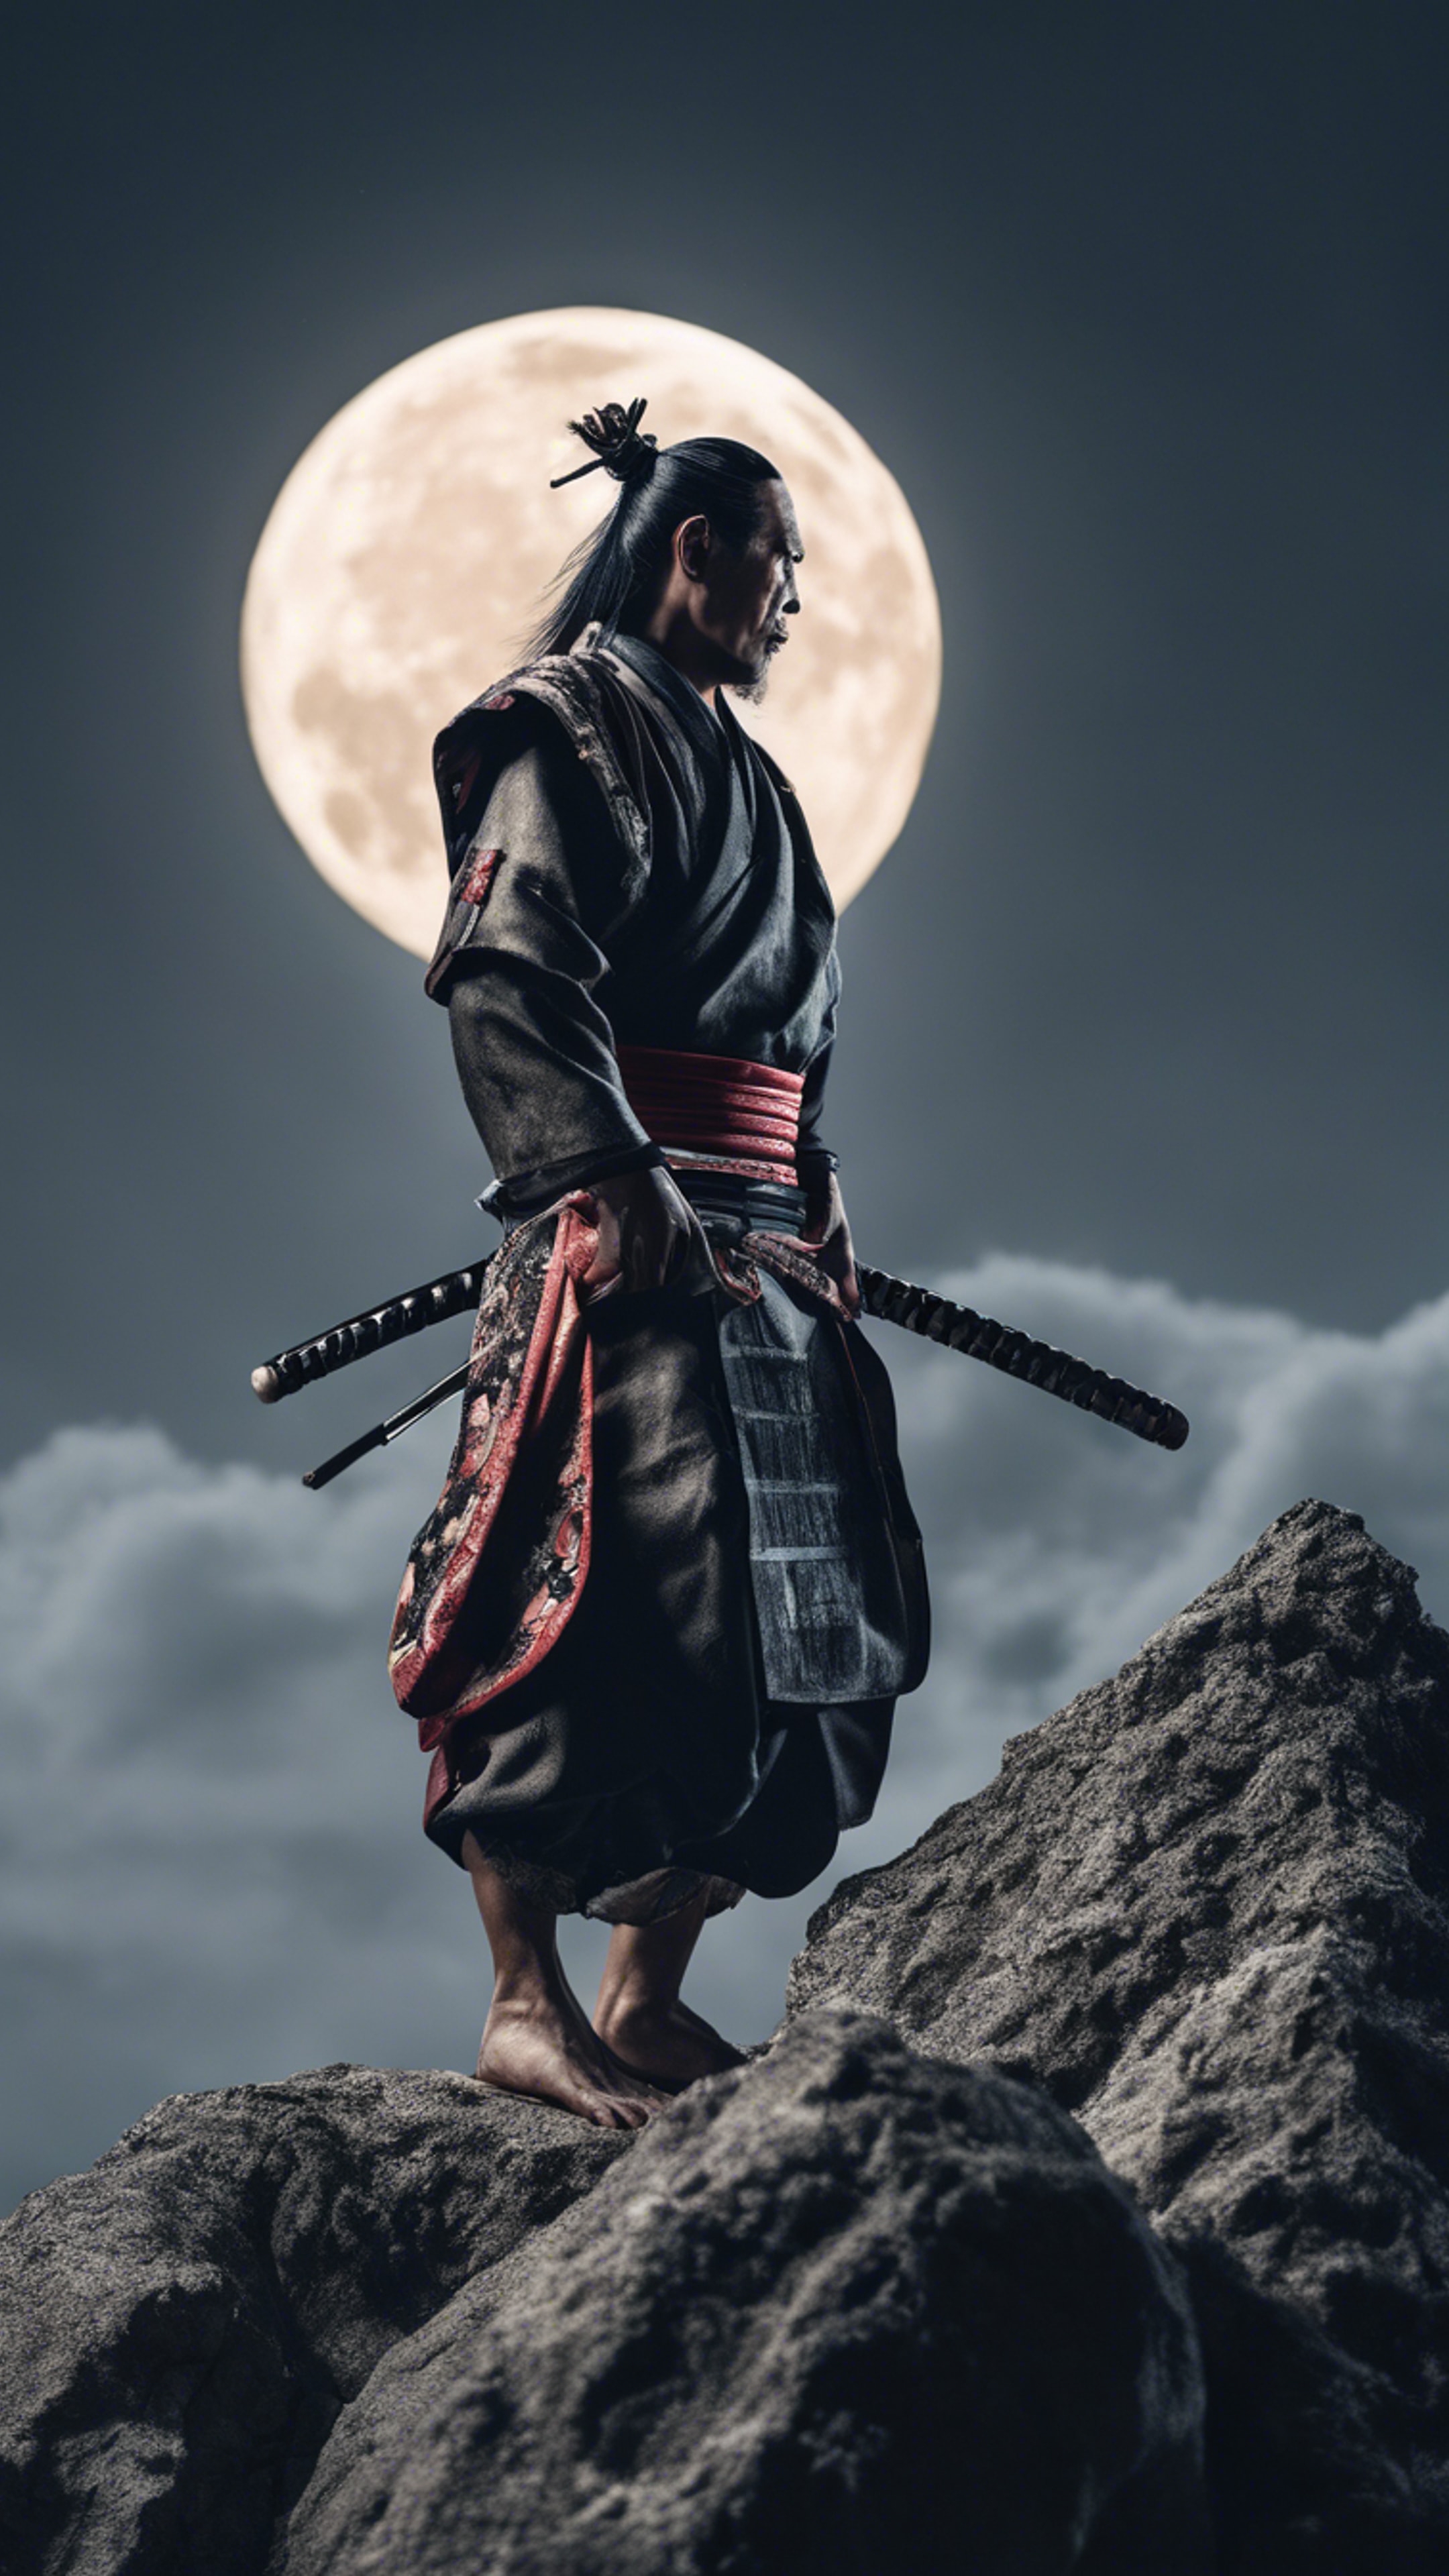 A dignified samurai standing on a rocky cliff under a full moon壁紙[853d4aeee7284f1d8df3]